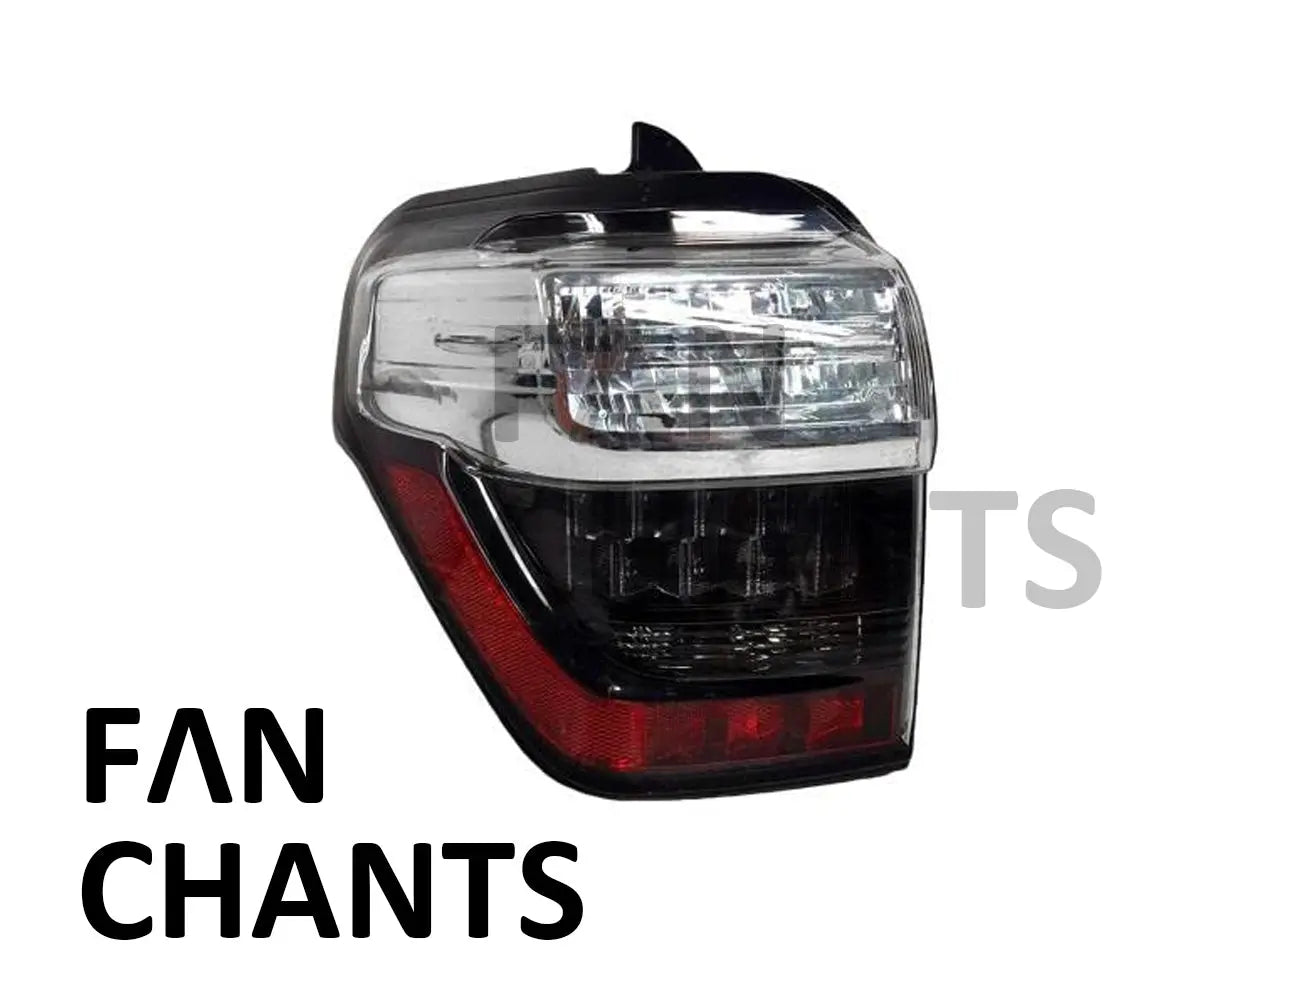 China Factory Wholeasle 81551-35402 81561-35392 TAIL LAMP RH LH For TOYOTA 4 RUNNER FANCHANTS China Auto Parts Wholesales